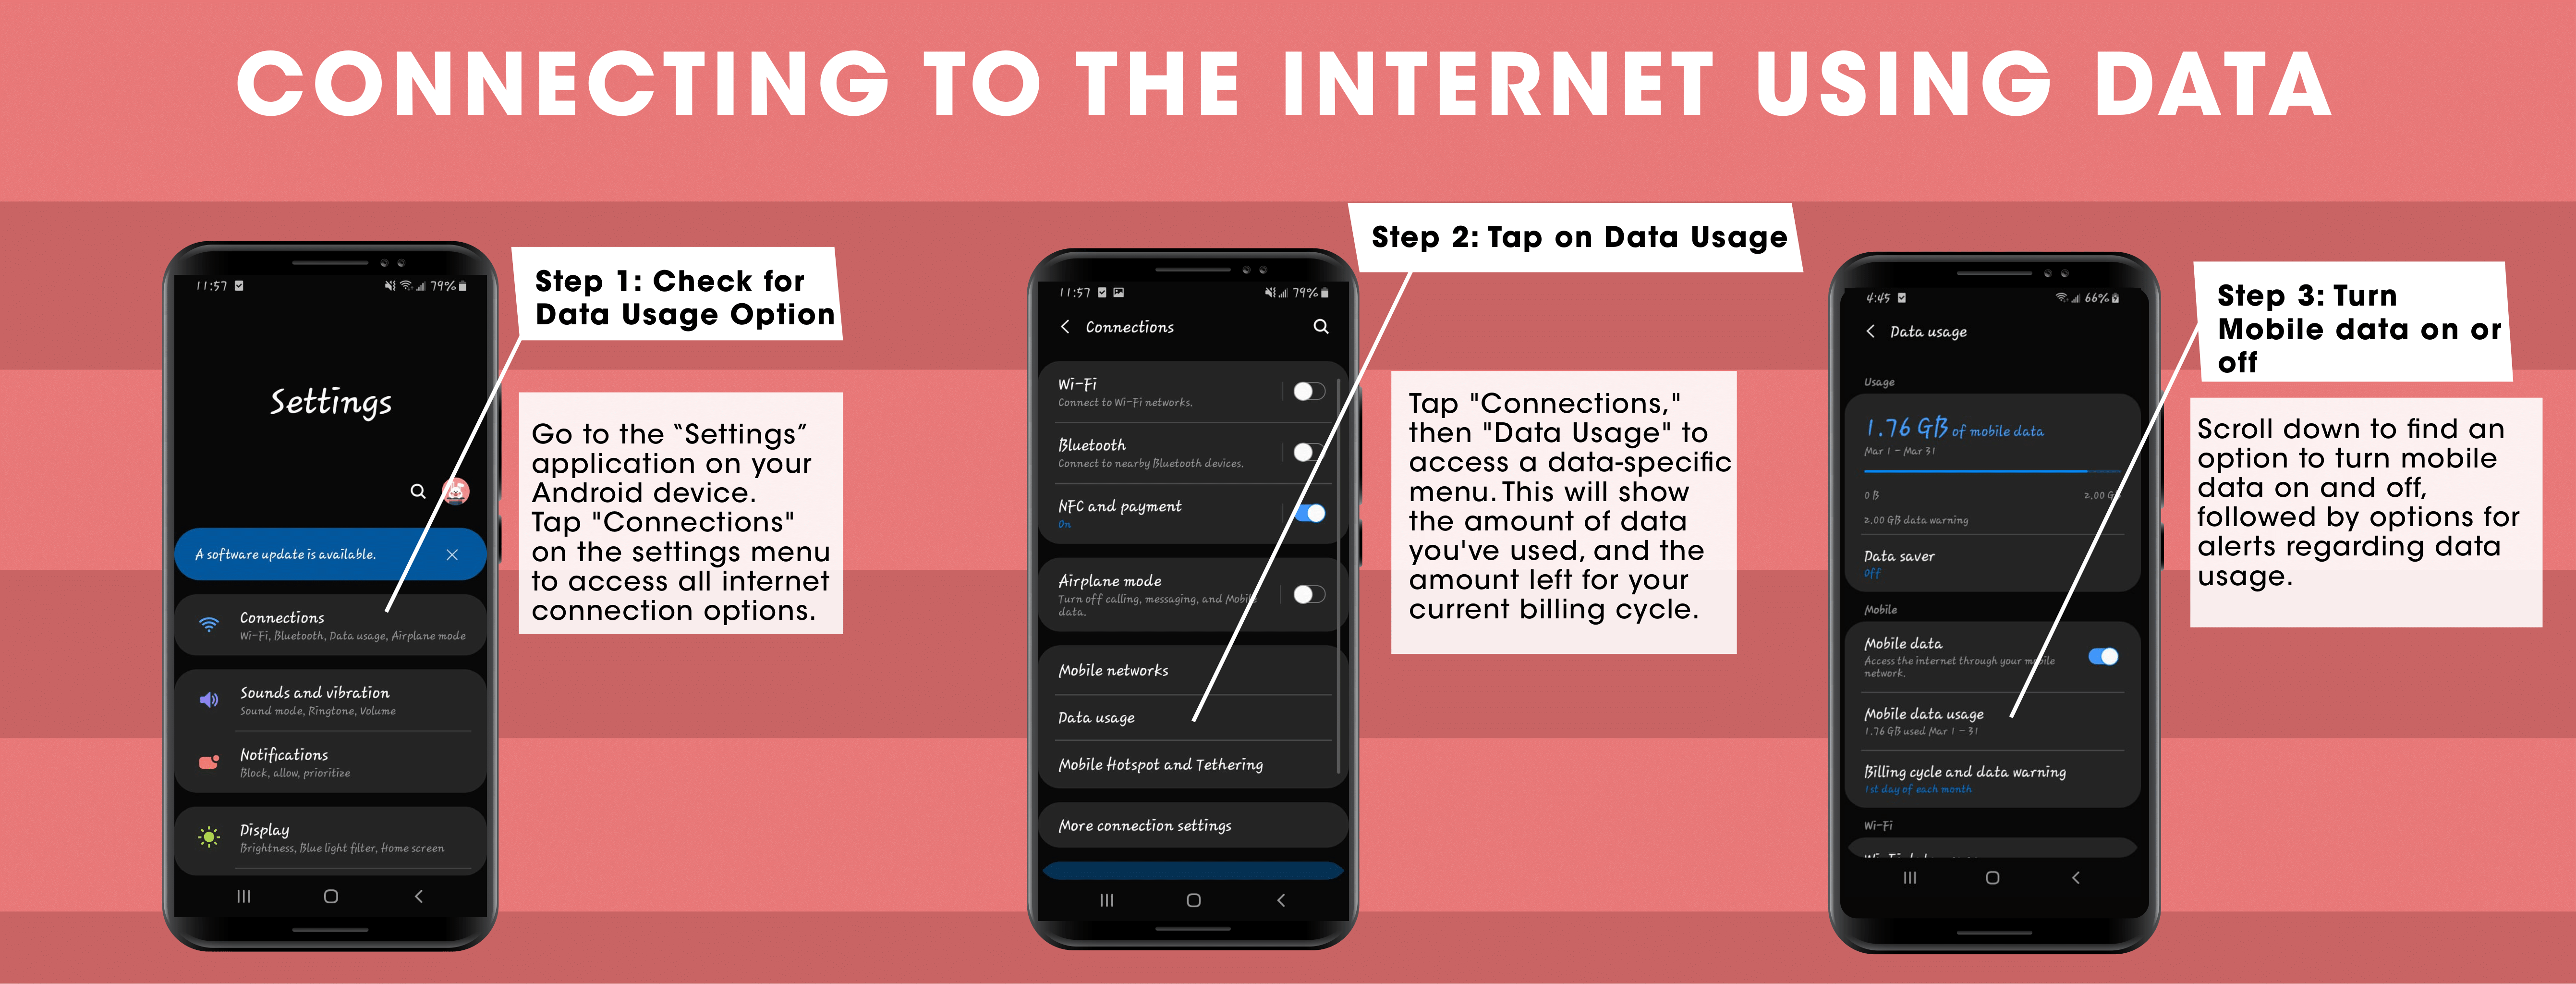 Graphic showing the steps needed to connect to the internet using data